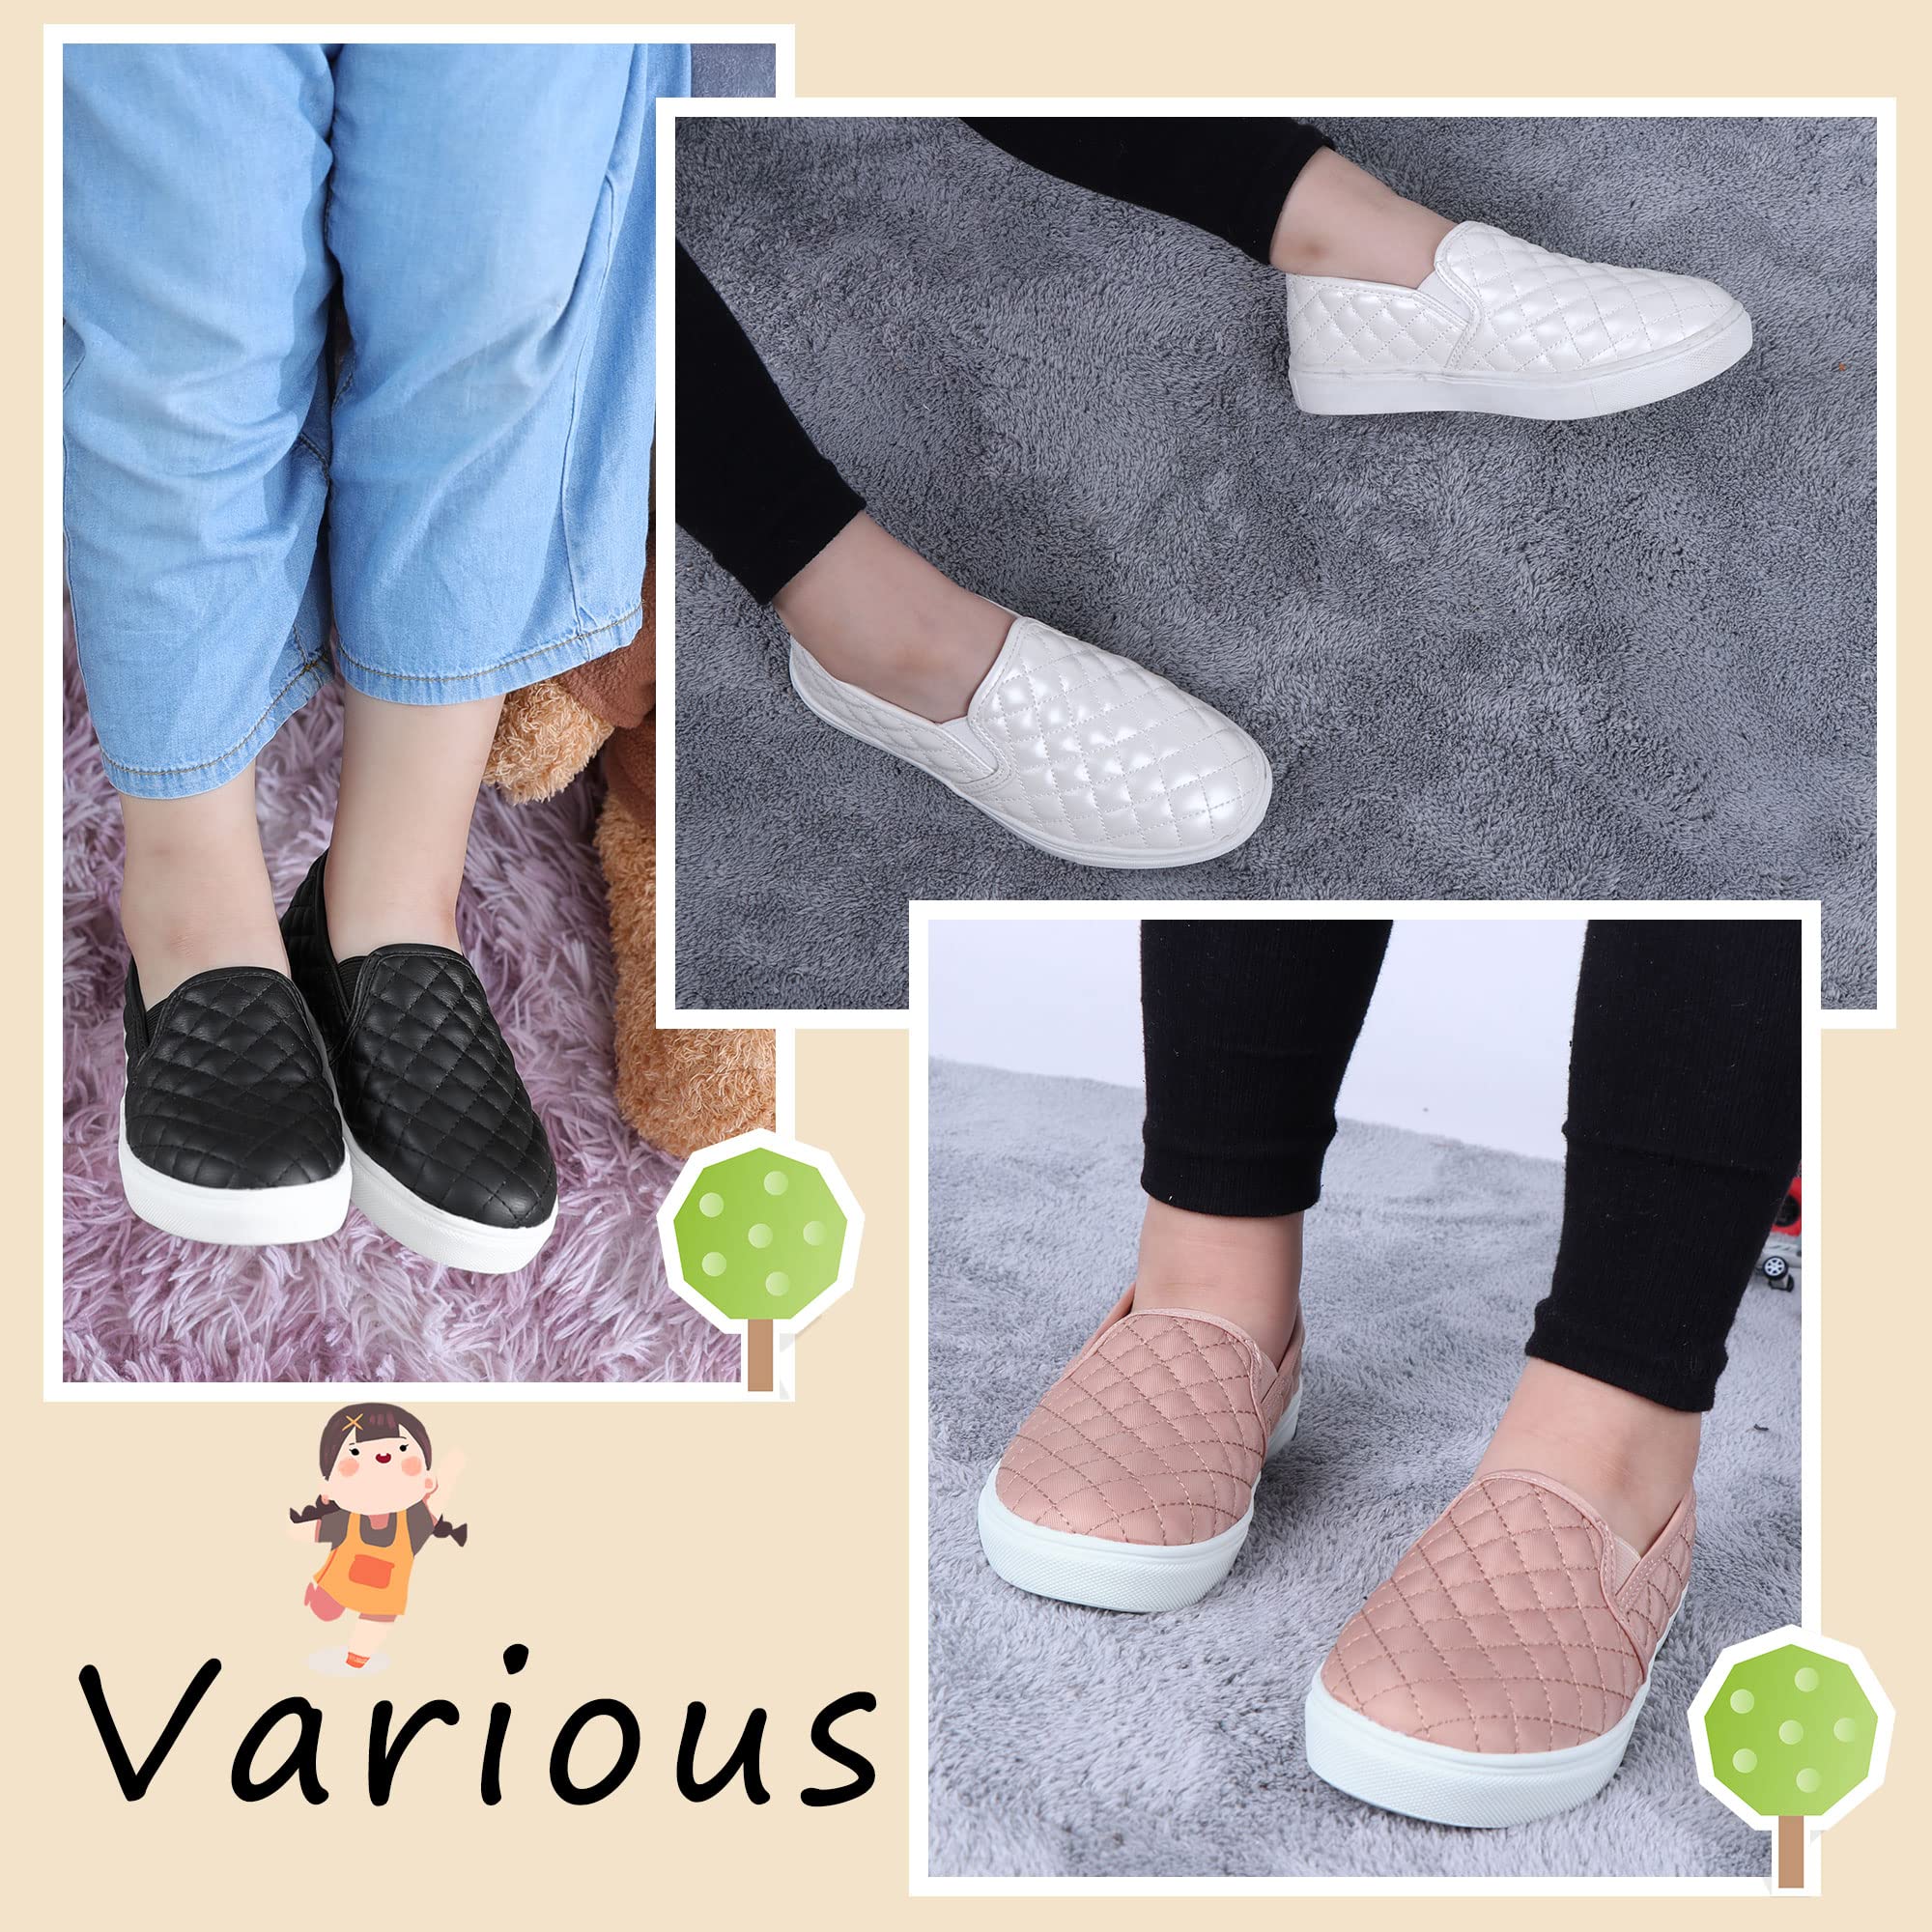 Tuboom Sneakers for Girls Slip On Shoes Little/Big Kid Comfort Low Top Fashion Tennis/Walking Casual Sneakers for Kids